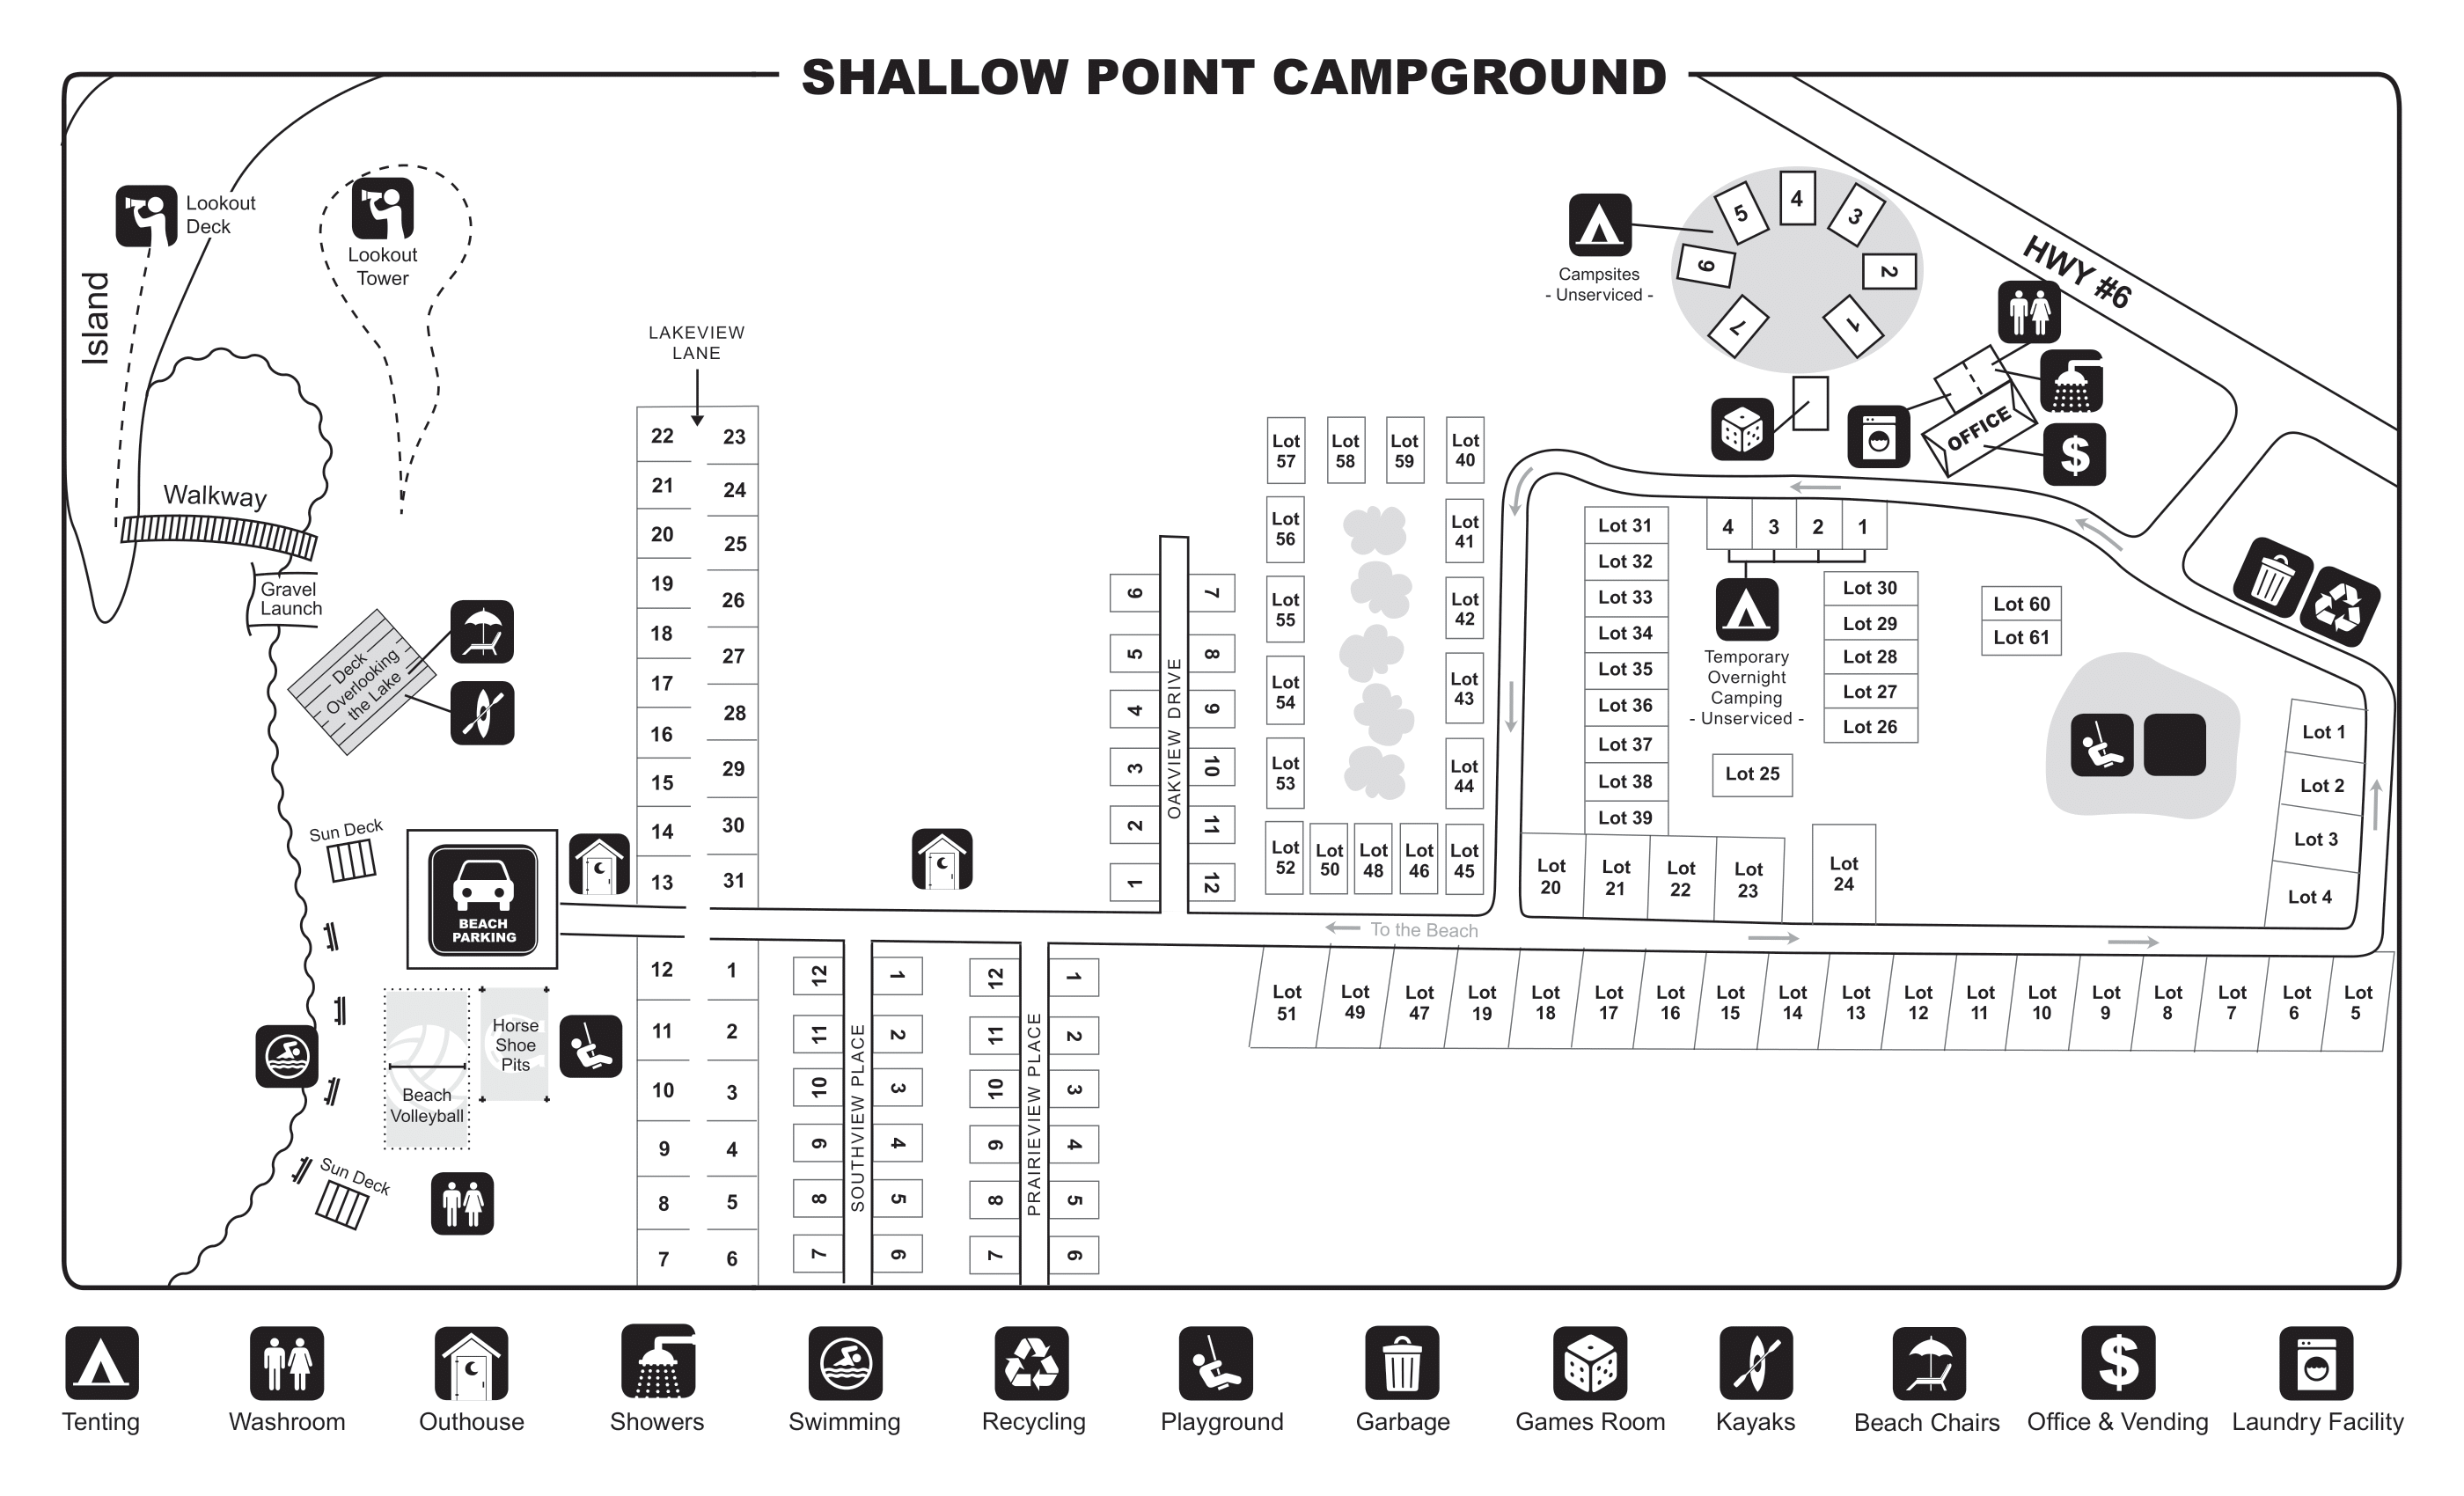 Shallow Point Campground Map